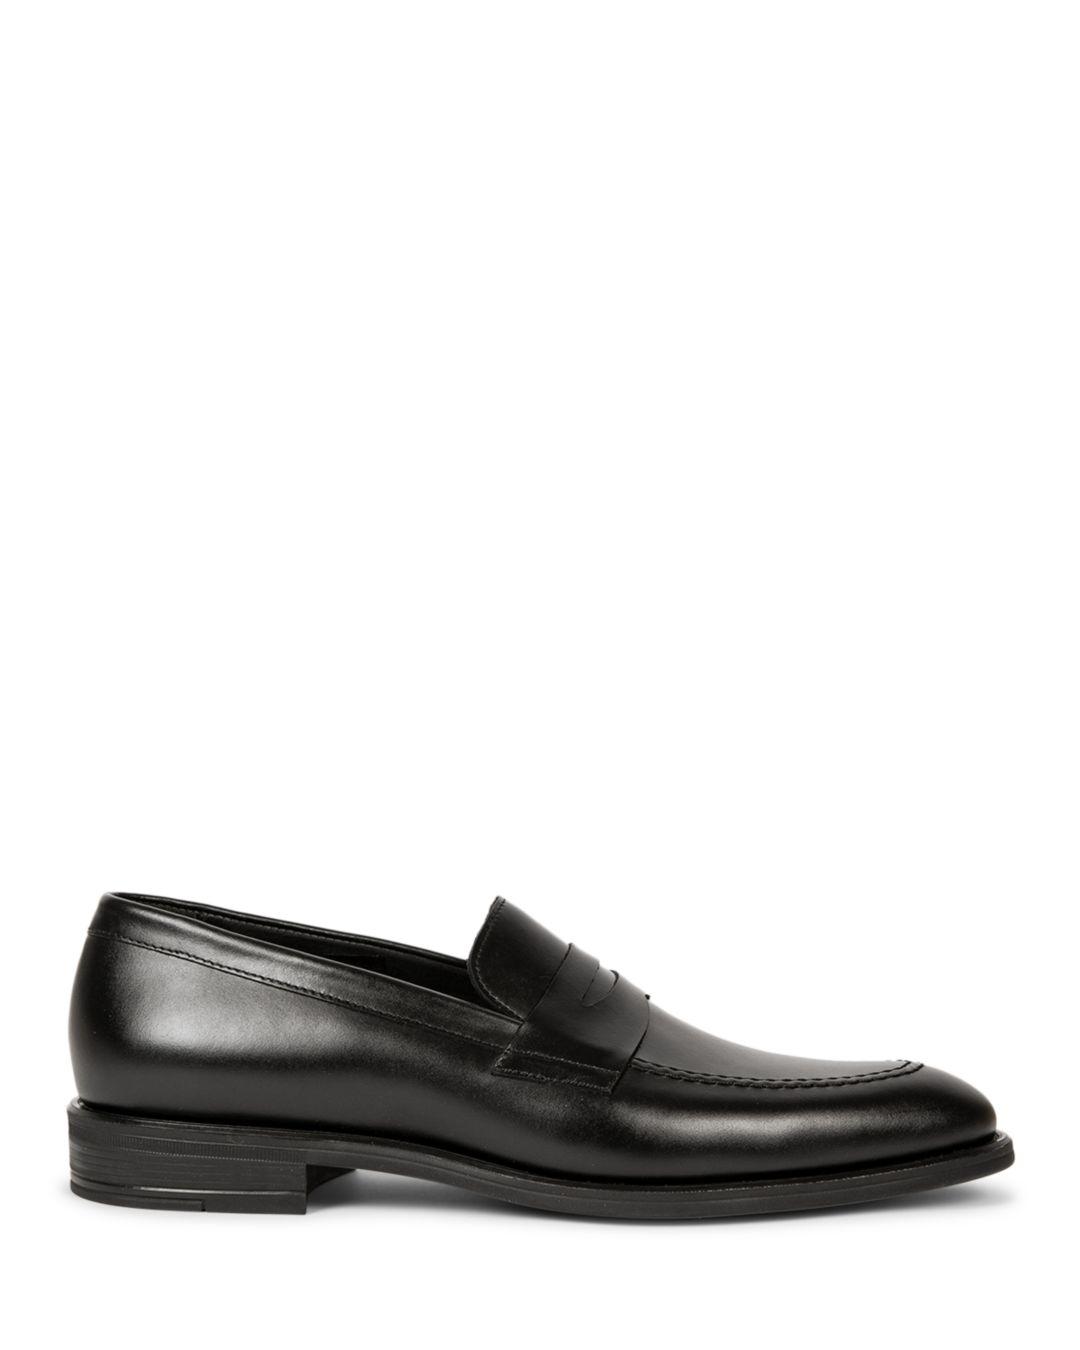 Paul Smith Remi Slip On Penny Loafers in Black for Men | Lyst